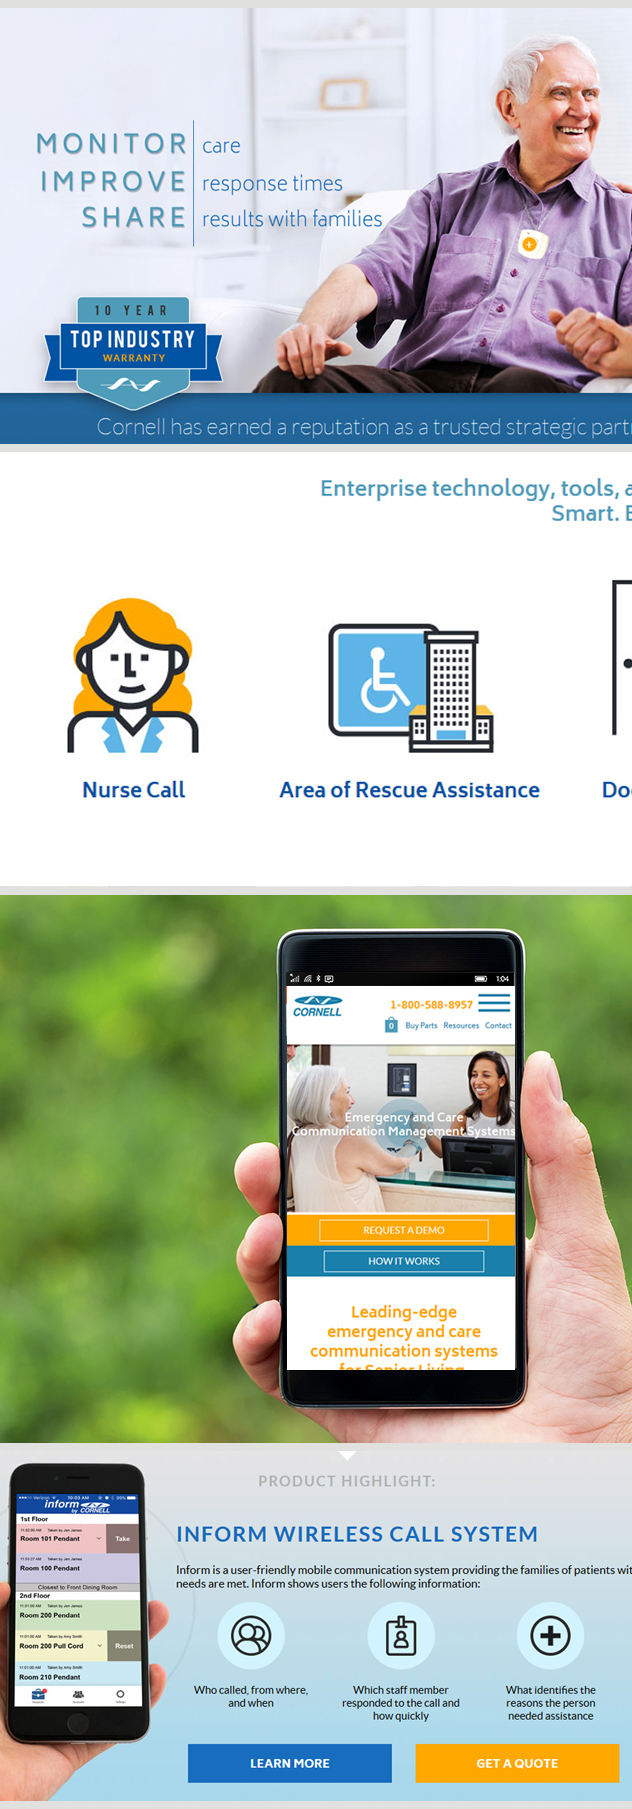 Milwaukee web marketing for Emergency and Care Communication System Supplier